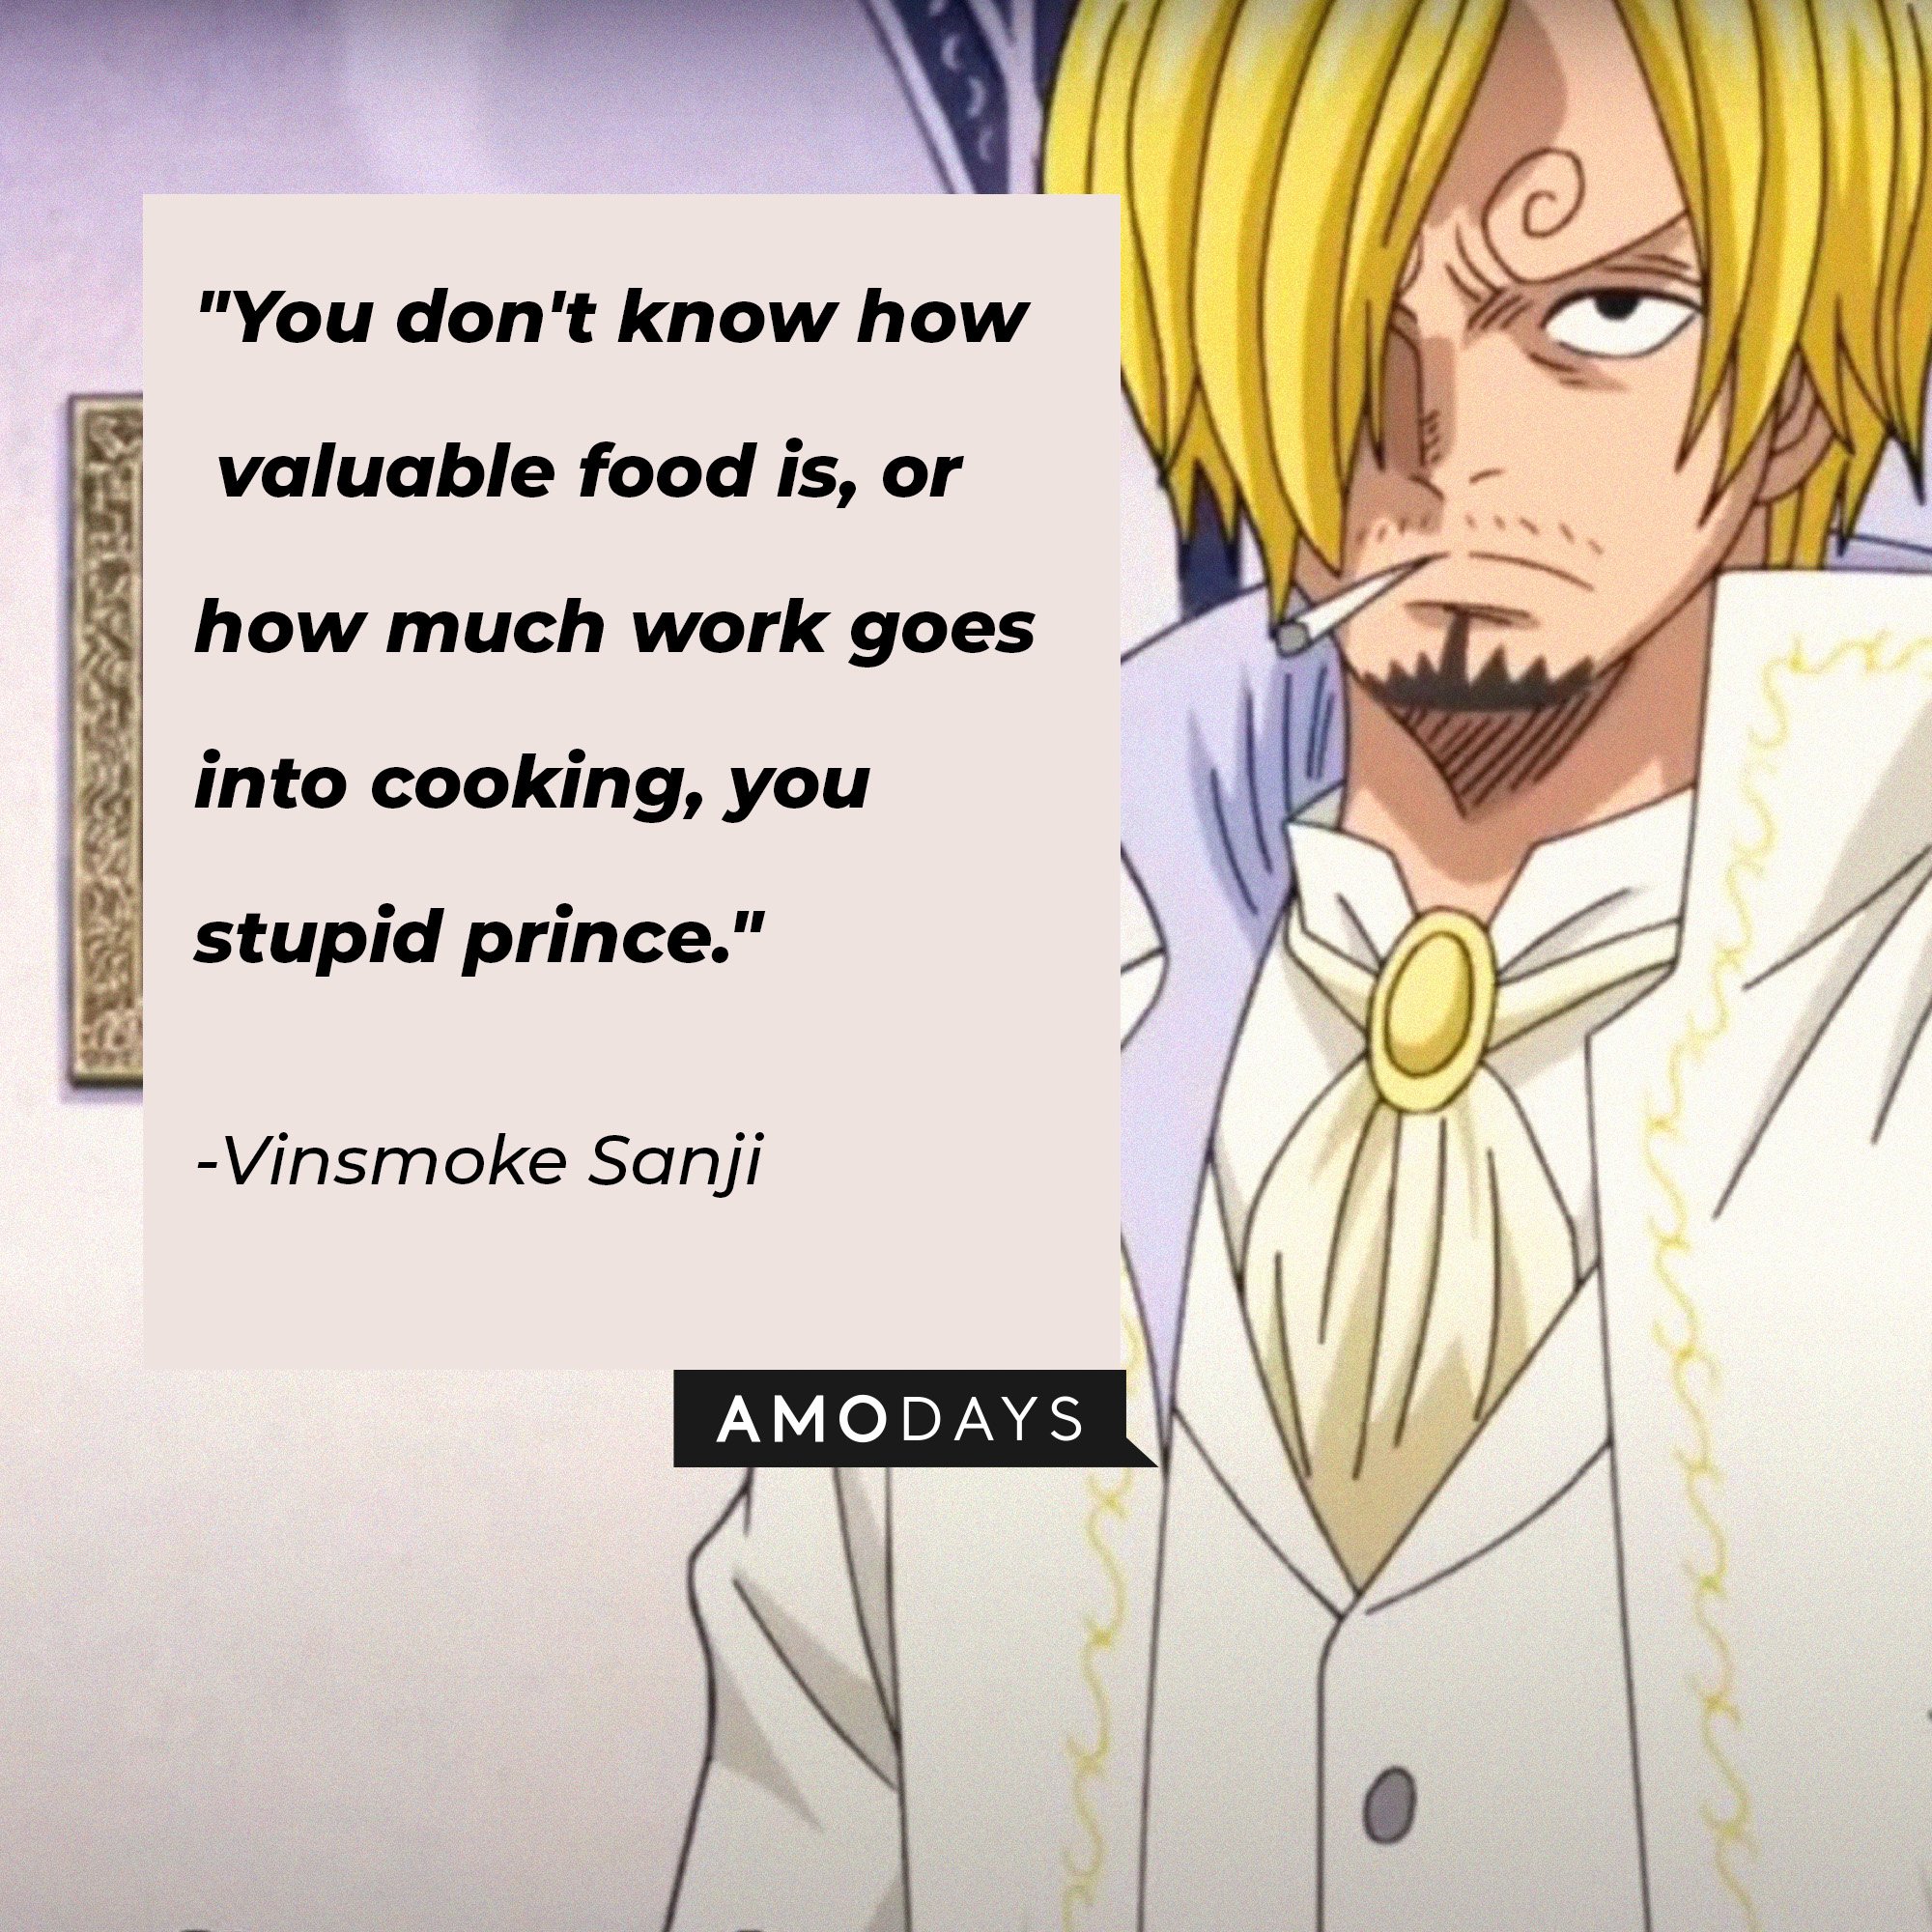 Vinsmoke Sanji's quote: "You don't know how valuable food is, or how much work goes into cooking, you stupid prince." | Image: AmoDays